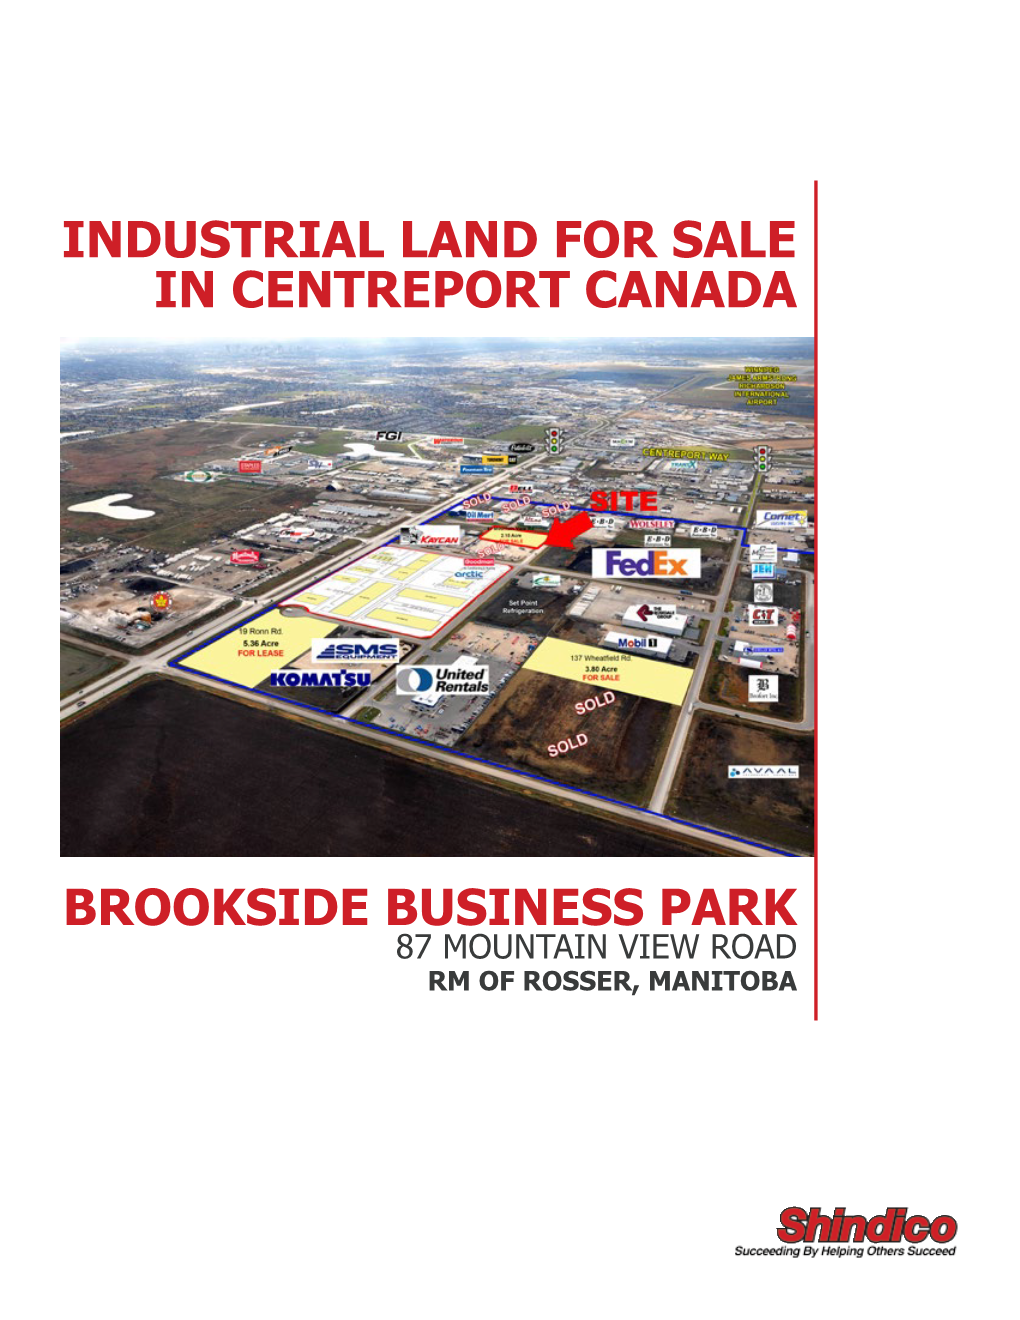 Industrial Land for Sale in Centreport Canada